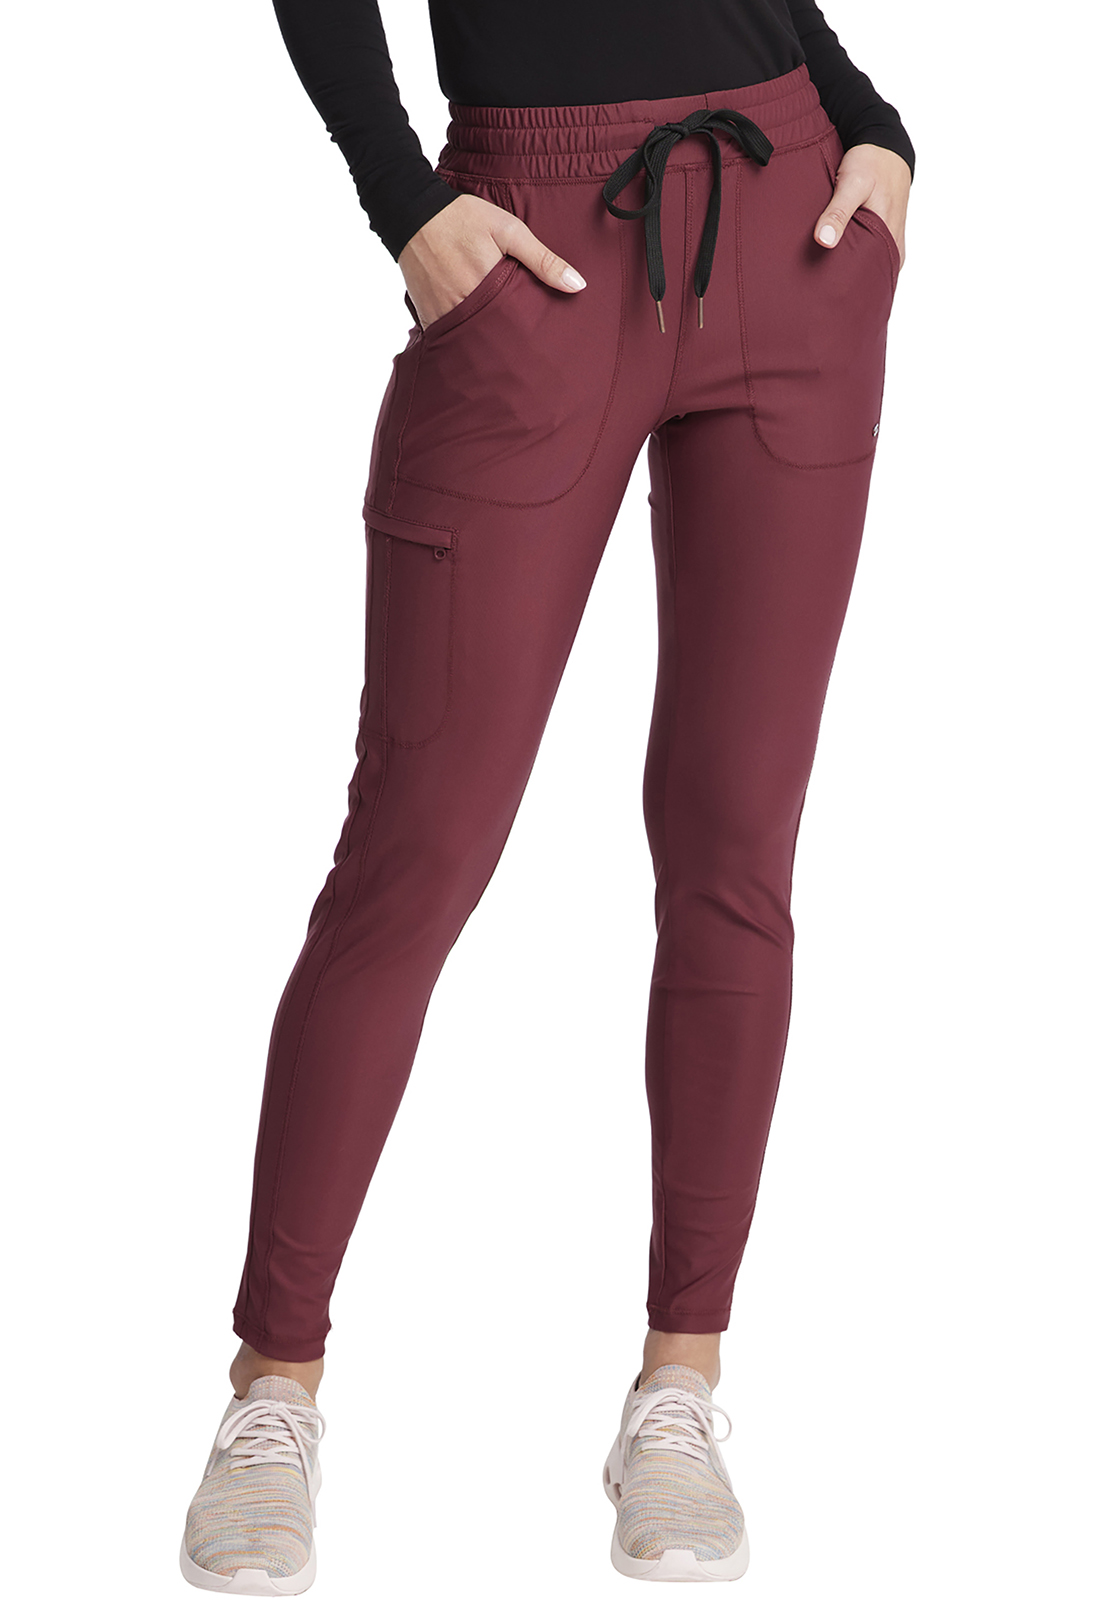 Buy Statement by Cherokee Mid Rise Tapered Leg Drawstring Pant